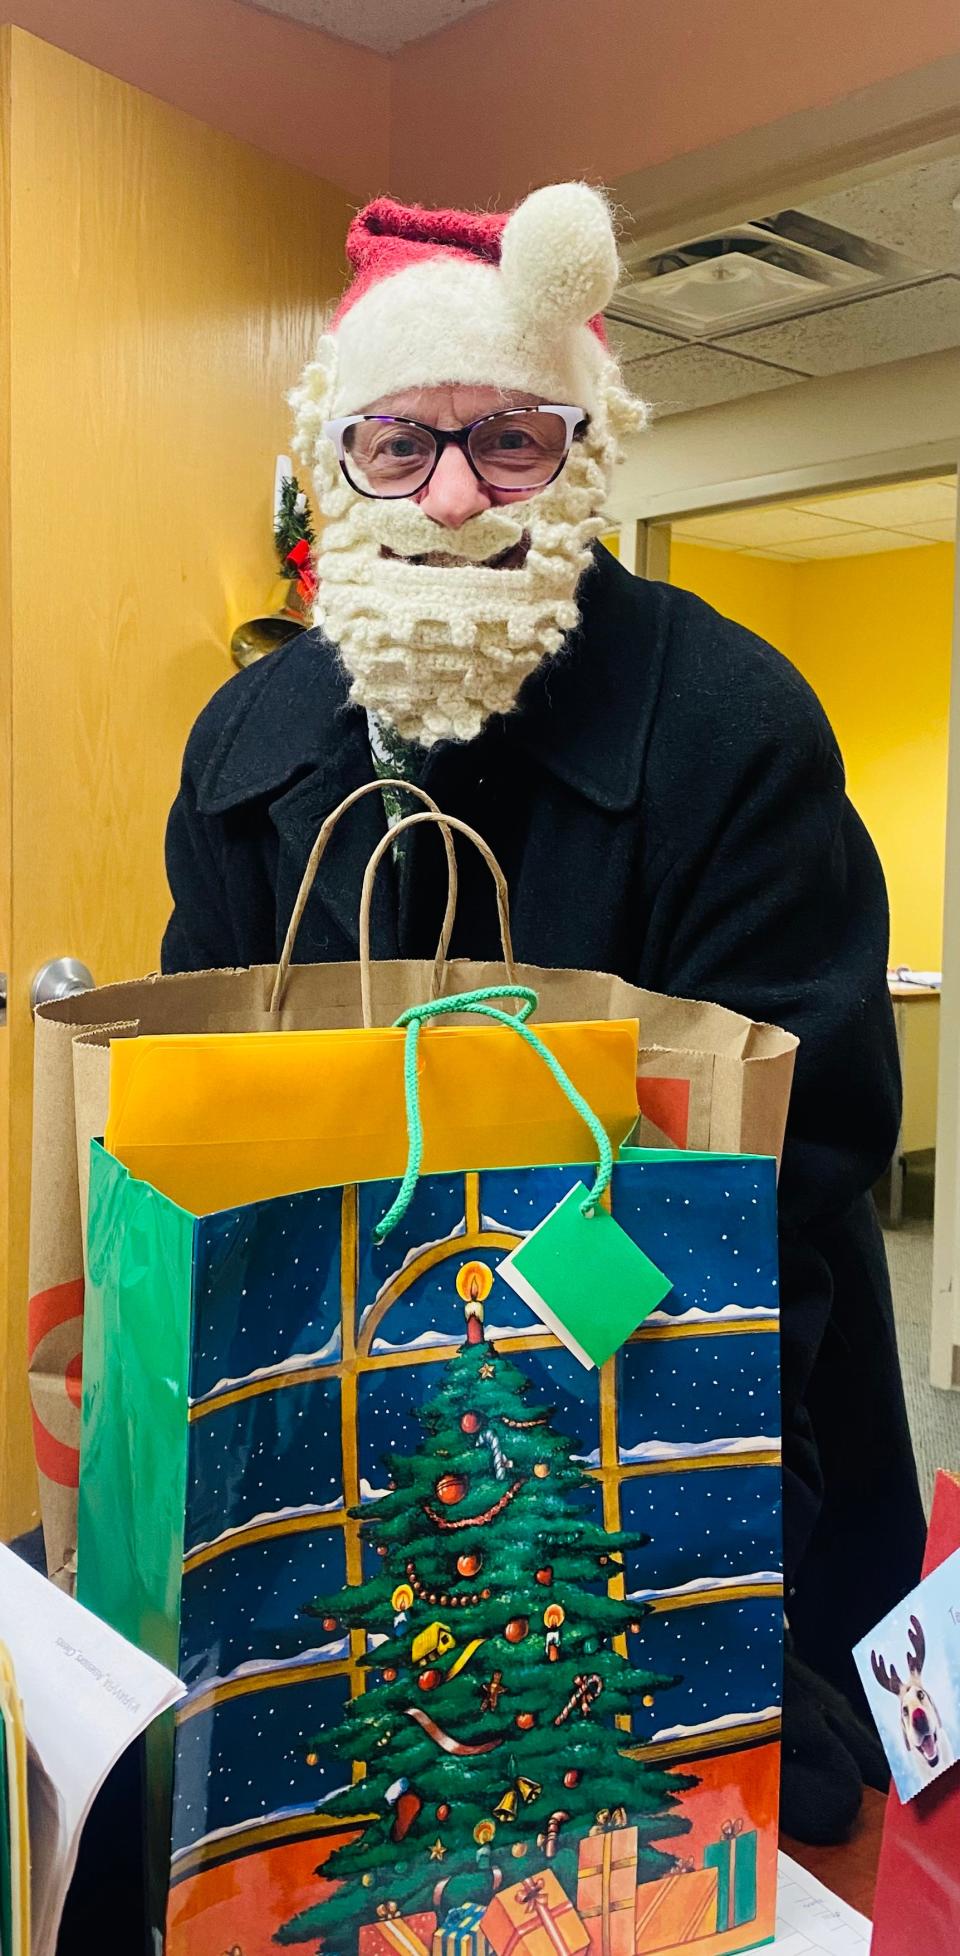 Joan Sprague, a volunteer for Faith in Action, plays Santa Claus as she prepares to deliver gifts to program participants.